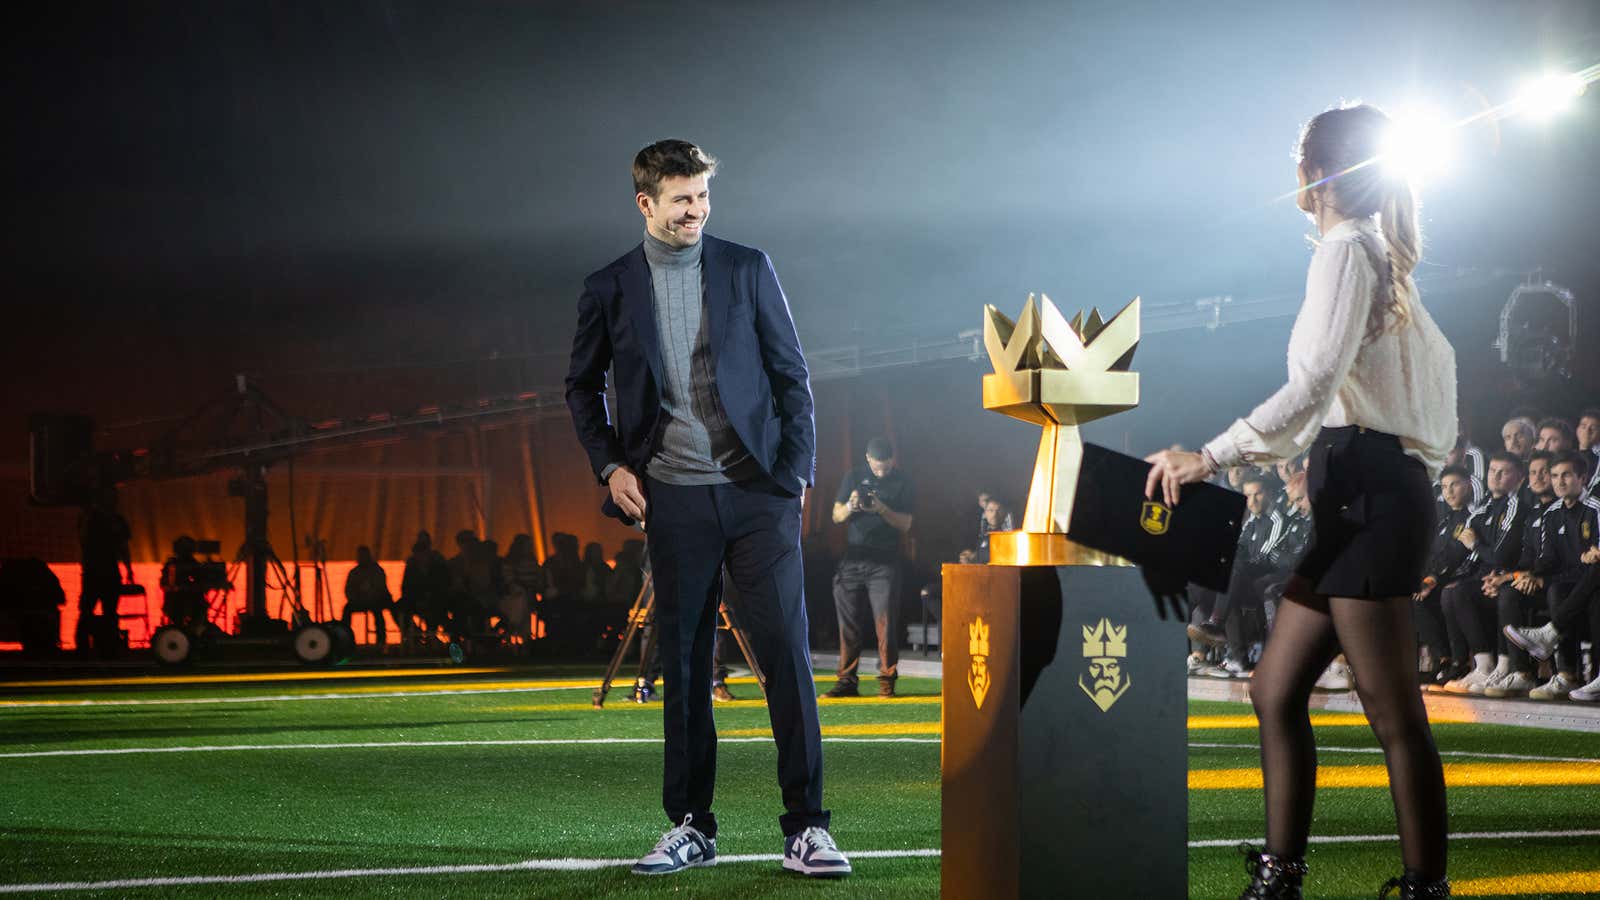 Pique's Kings League draws over two million viewers for Camp Nou